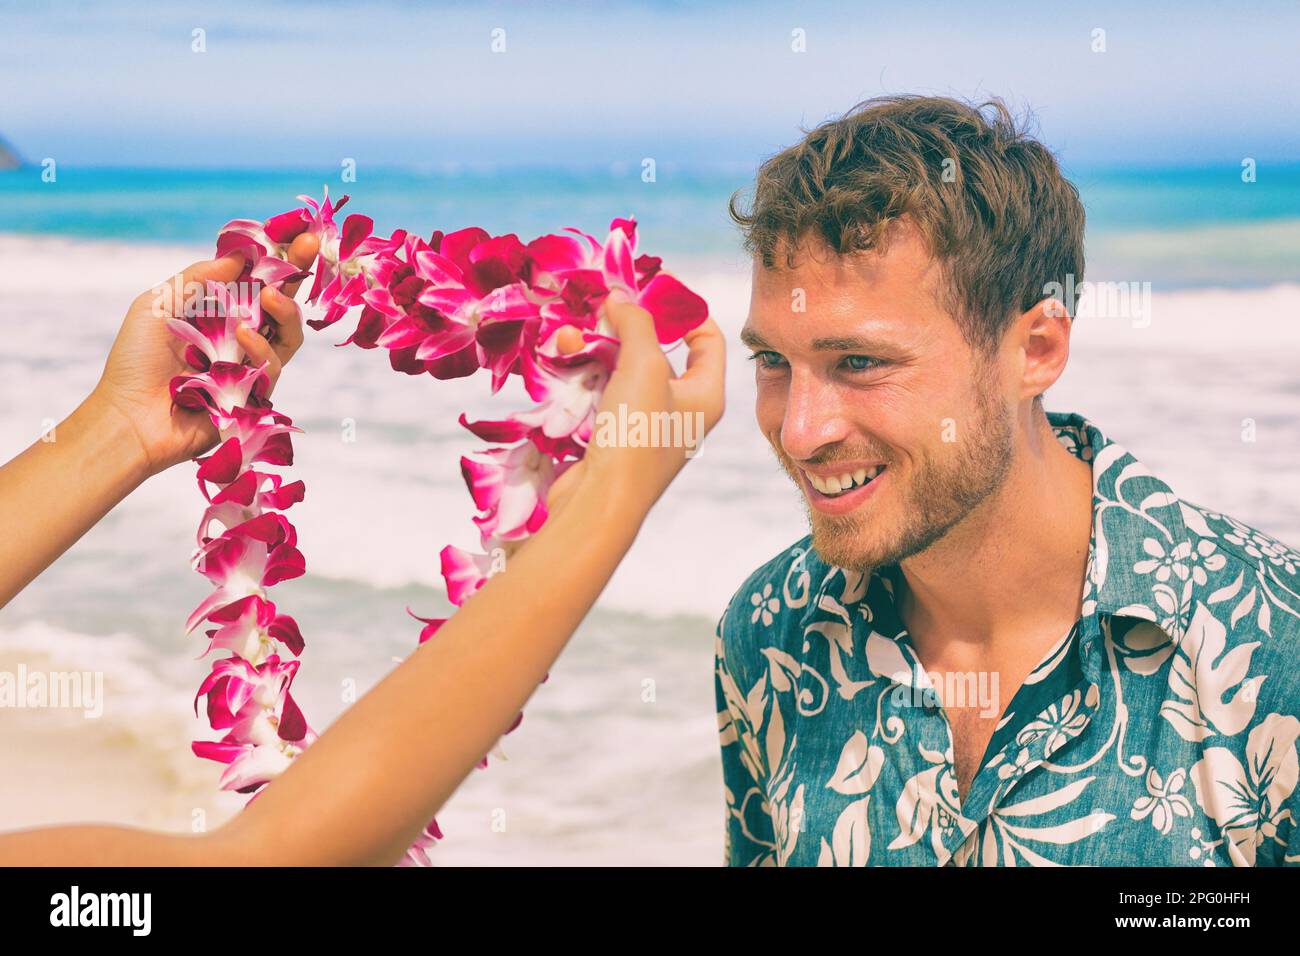 Hawaii Flowers Lei Necklace Made Orchid Flower Photos and Images |  Shutterstock